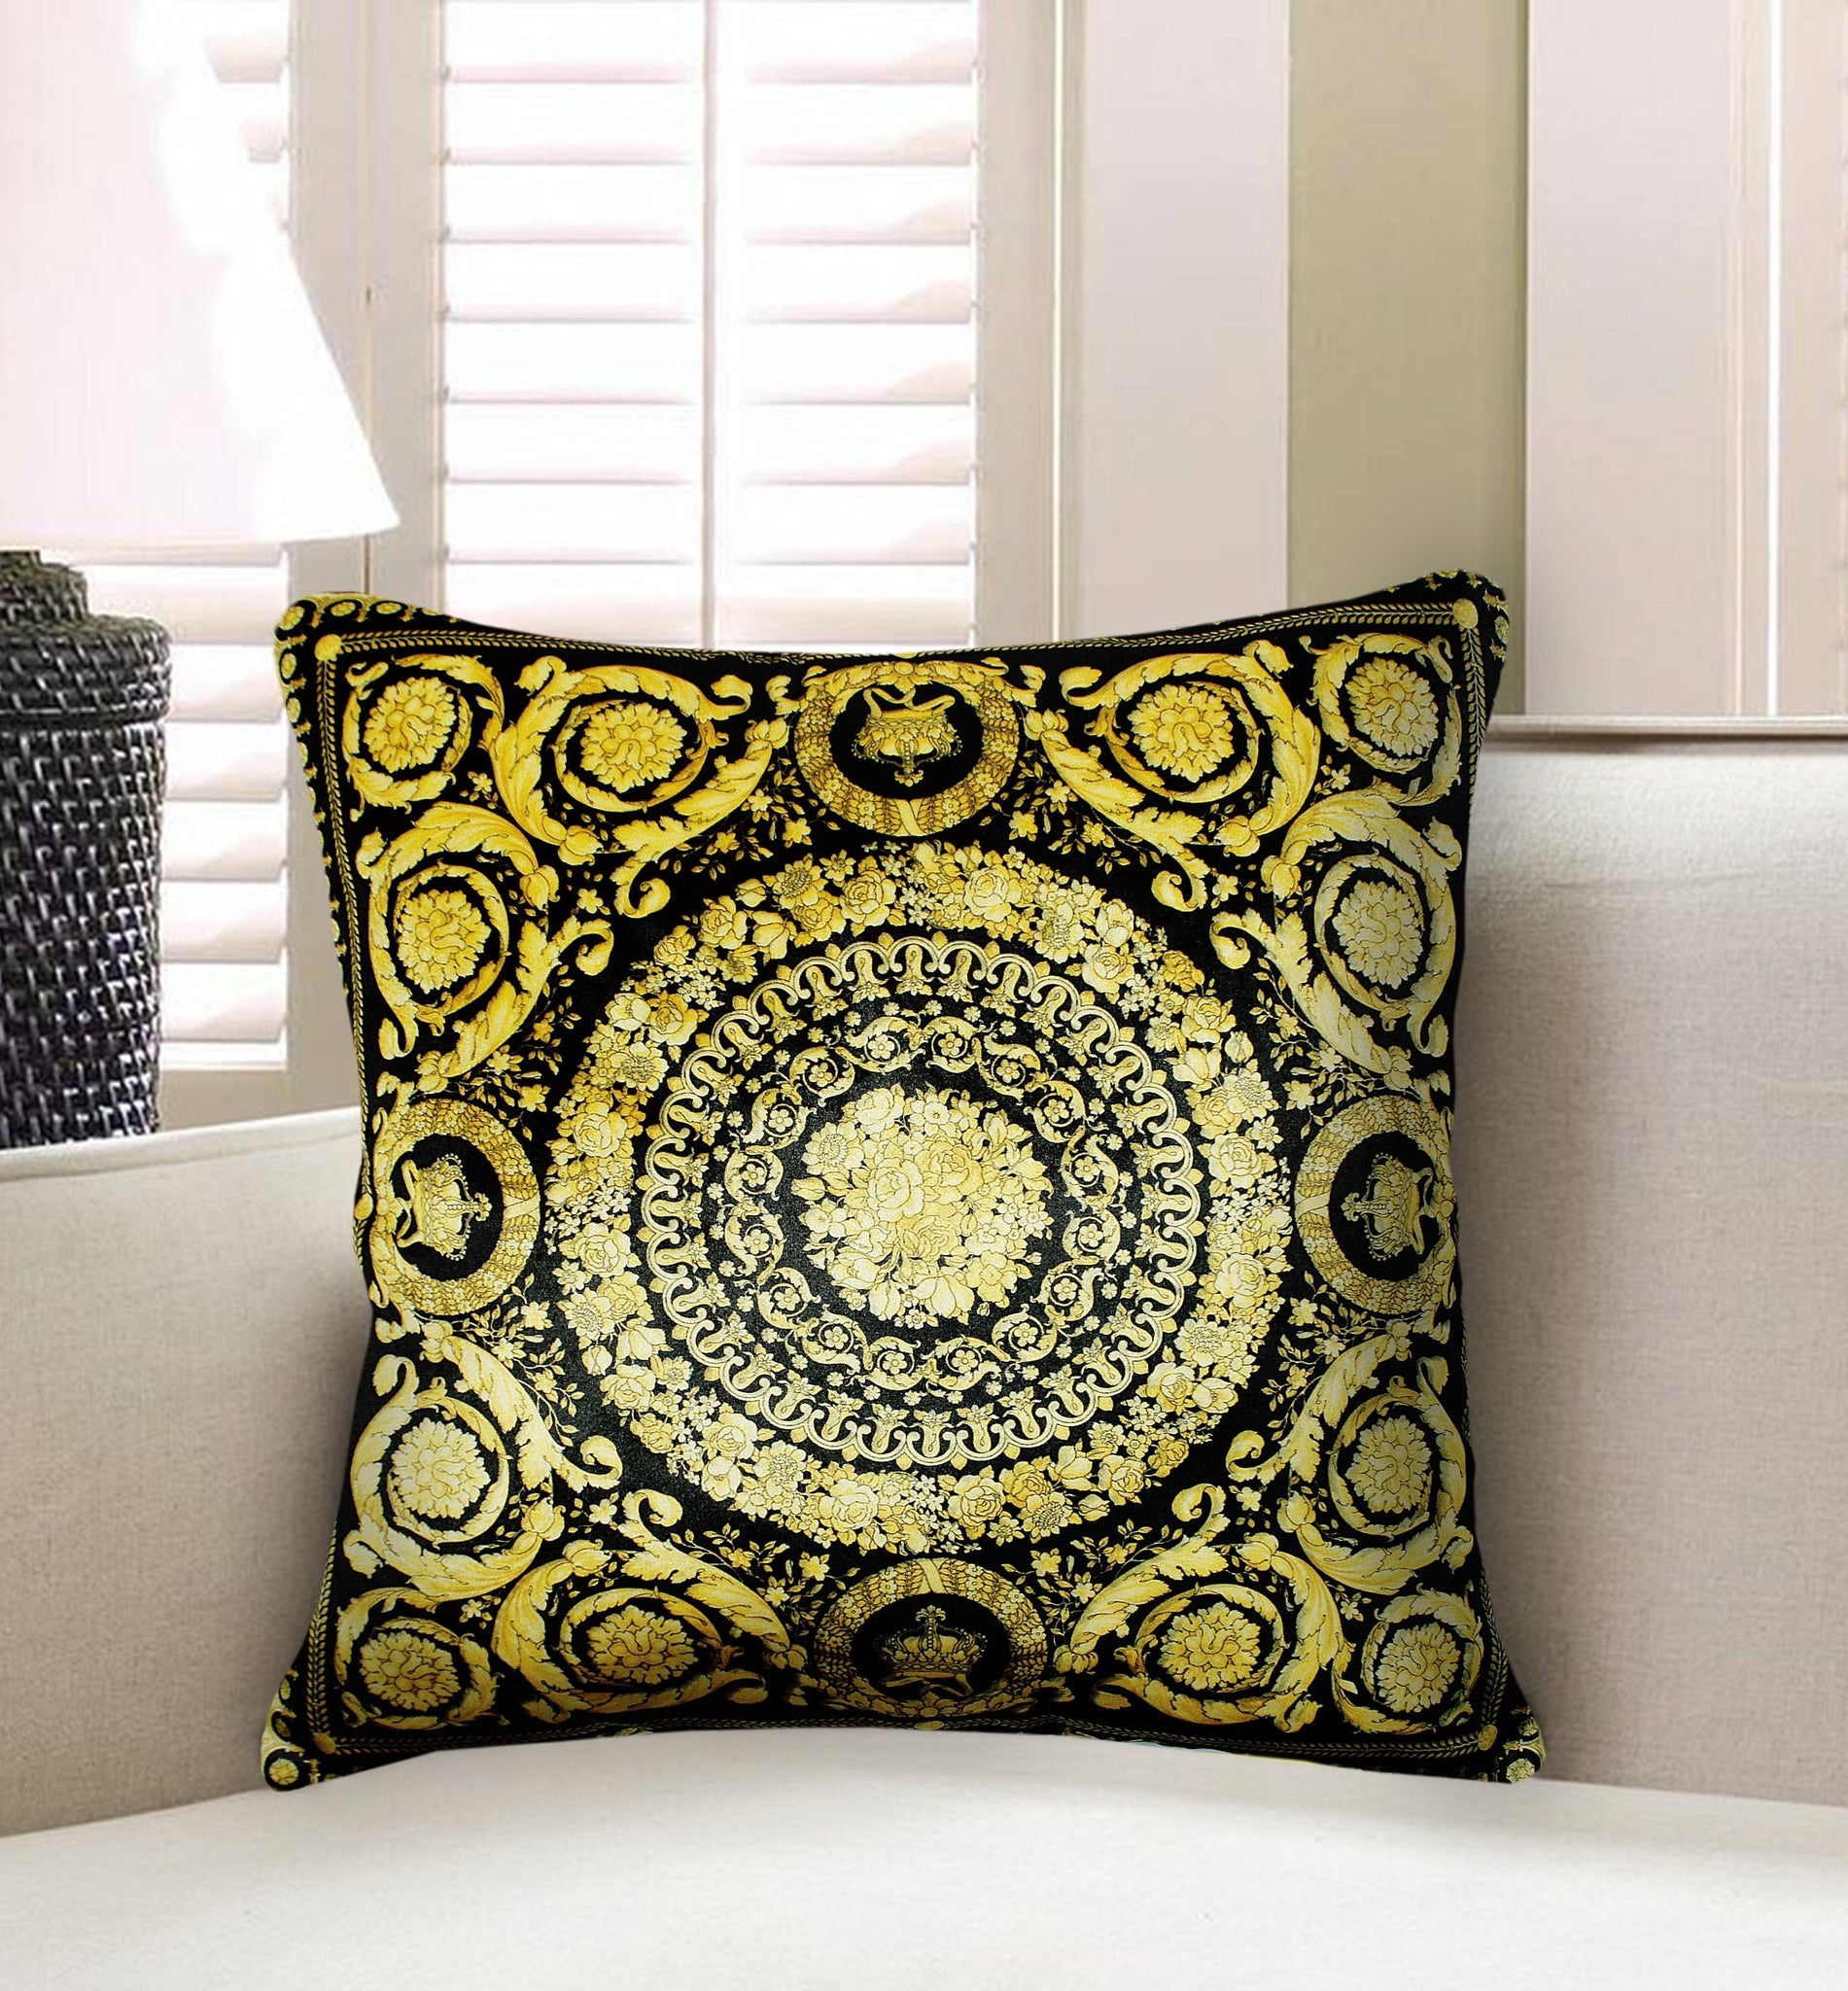 Black Velvet Cushion Cover Classic Baroque Style Decorative pillowcase Traditional Floral Motif Décor Throw Pillow for Sofa Chair Bedroom Living Room 45x45cm(18x18 Inches)